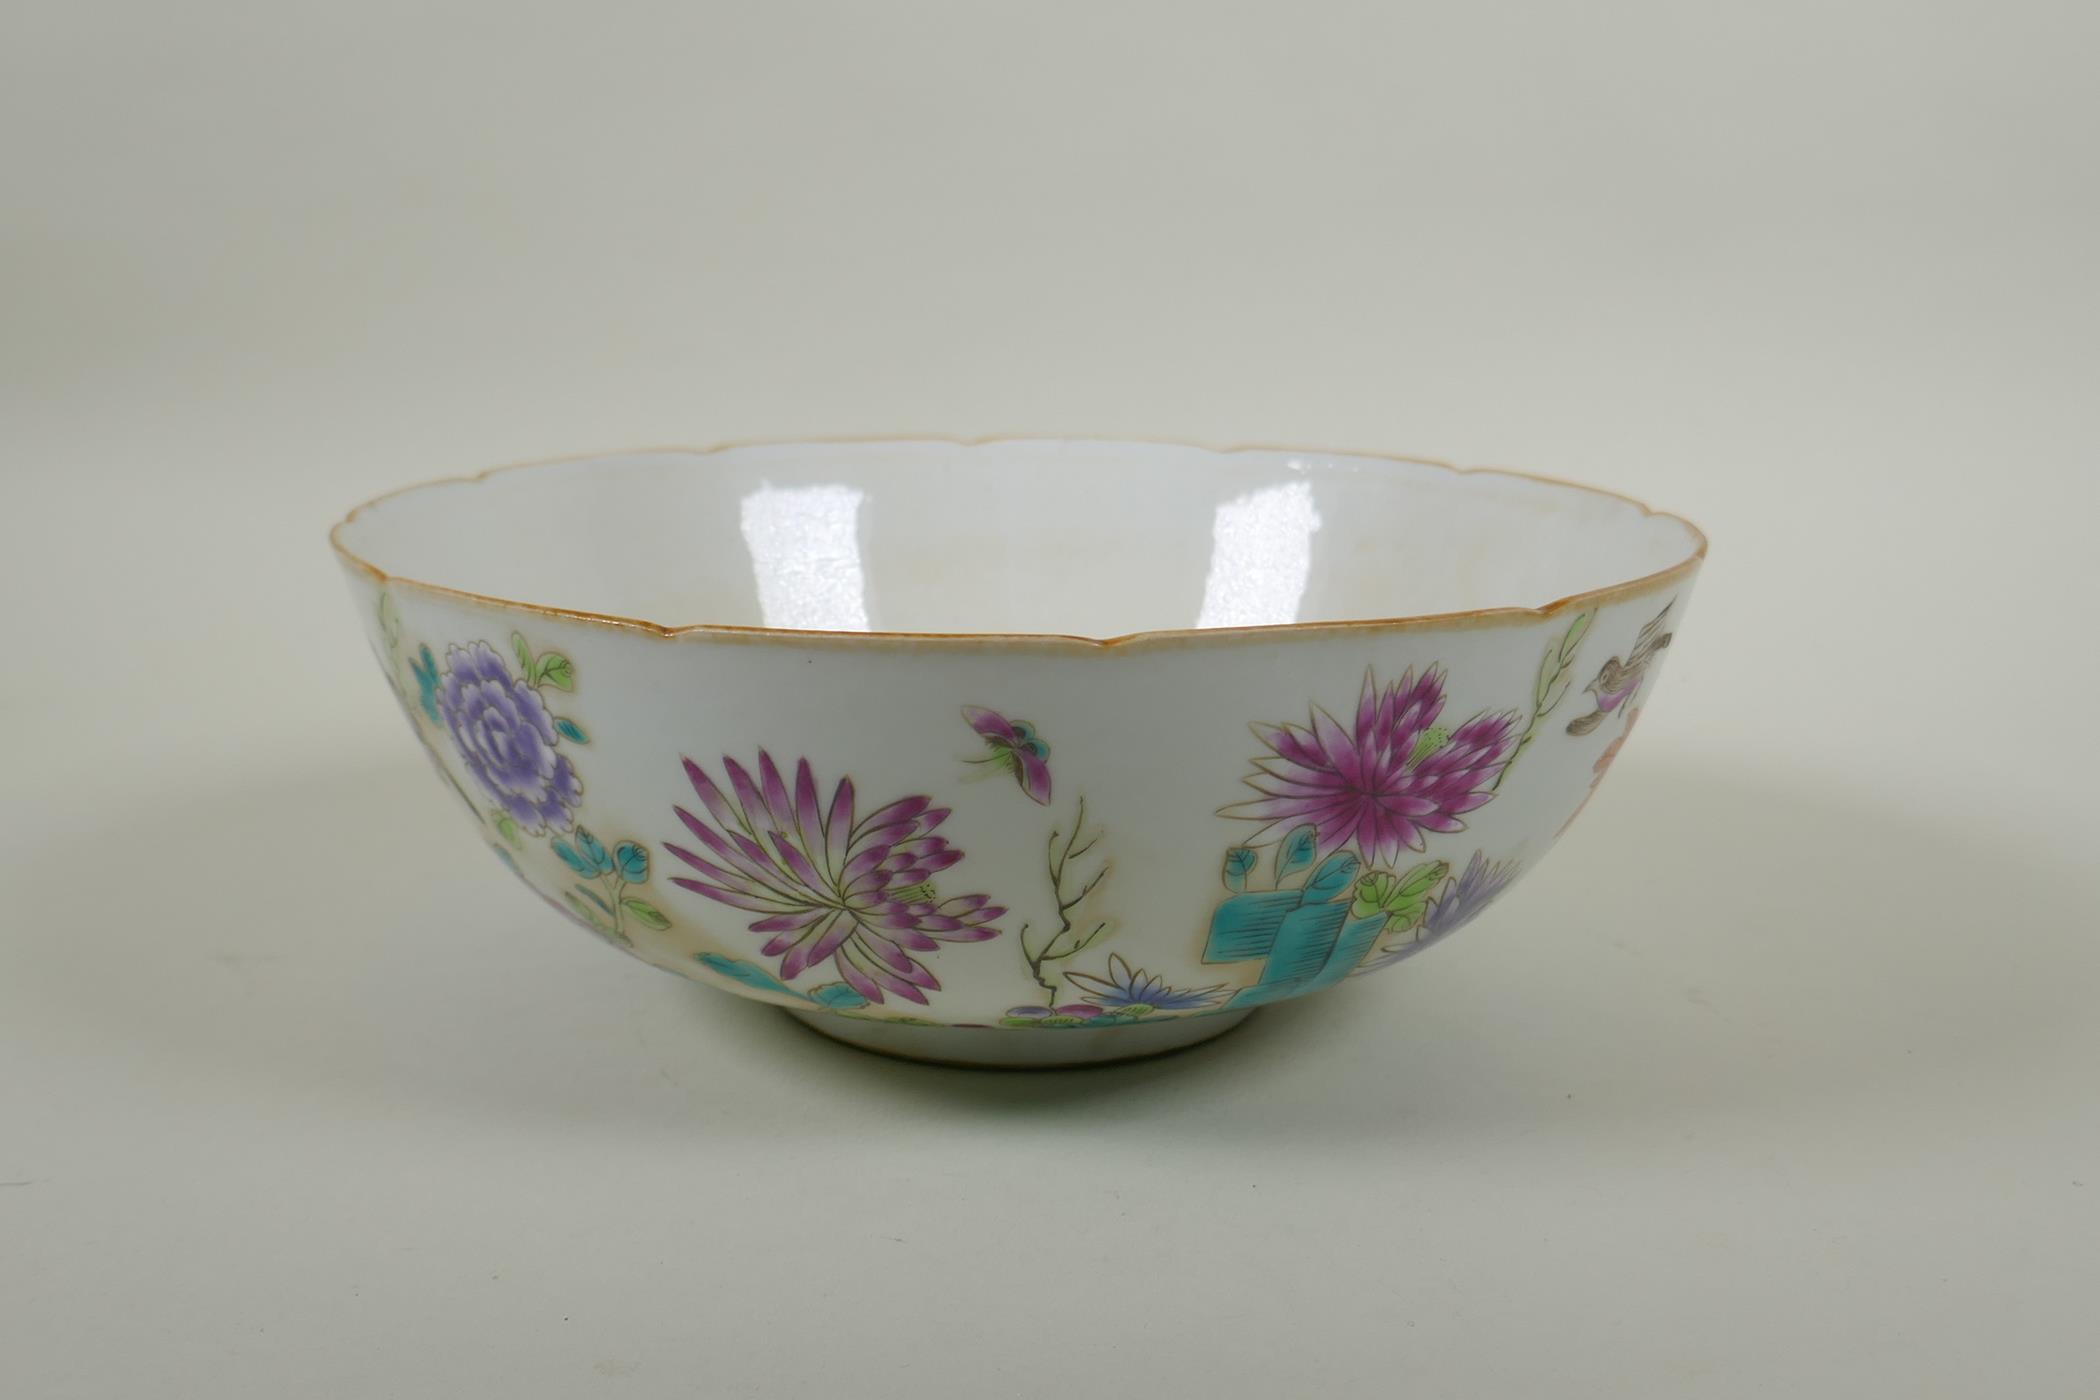 A C19th Chinese famille rose porcelain bowl with lobed rim, decorated with birds amongst asiatic